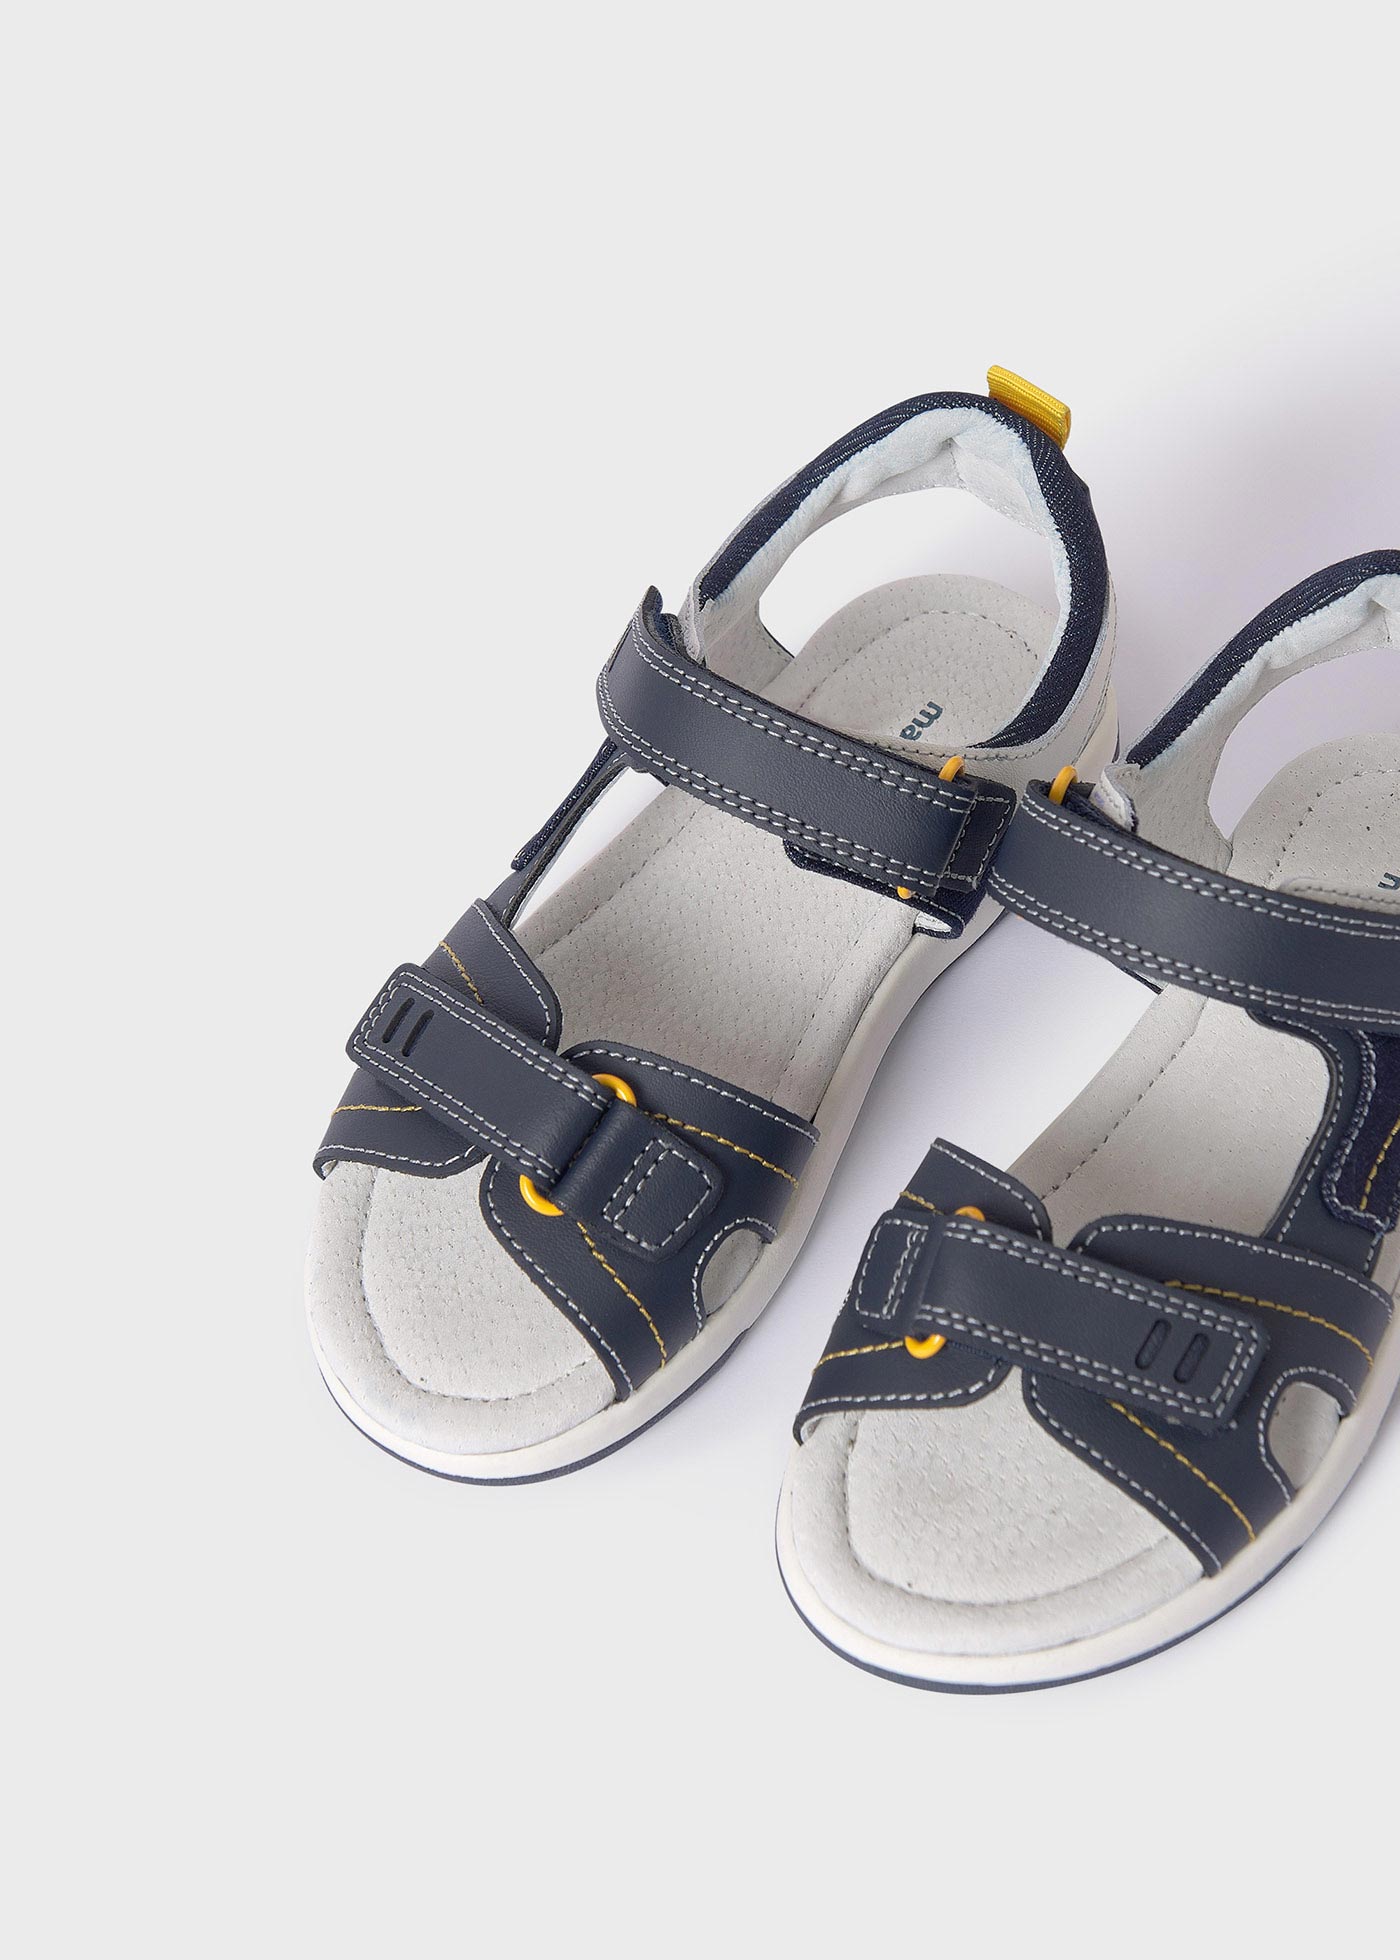 Boys sandals sustainable leather